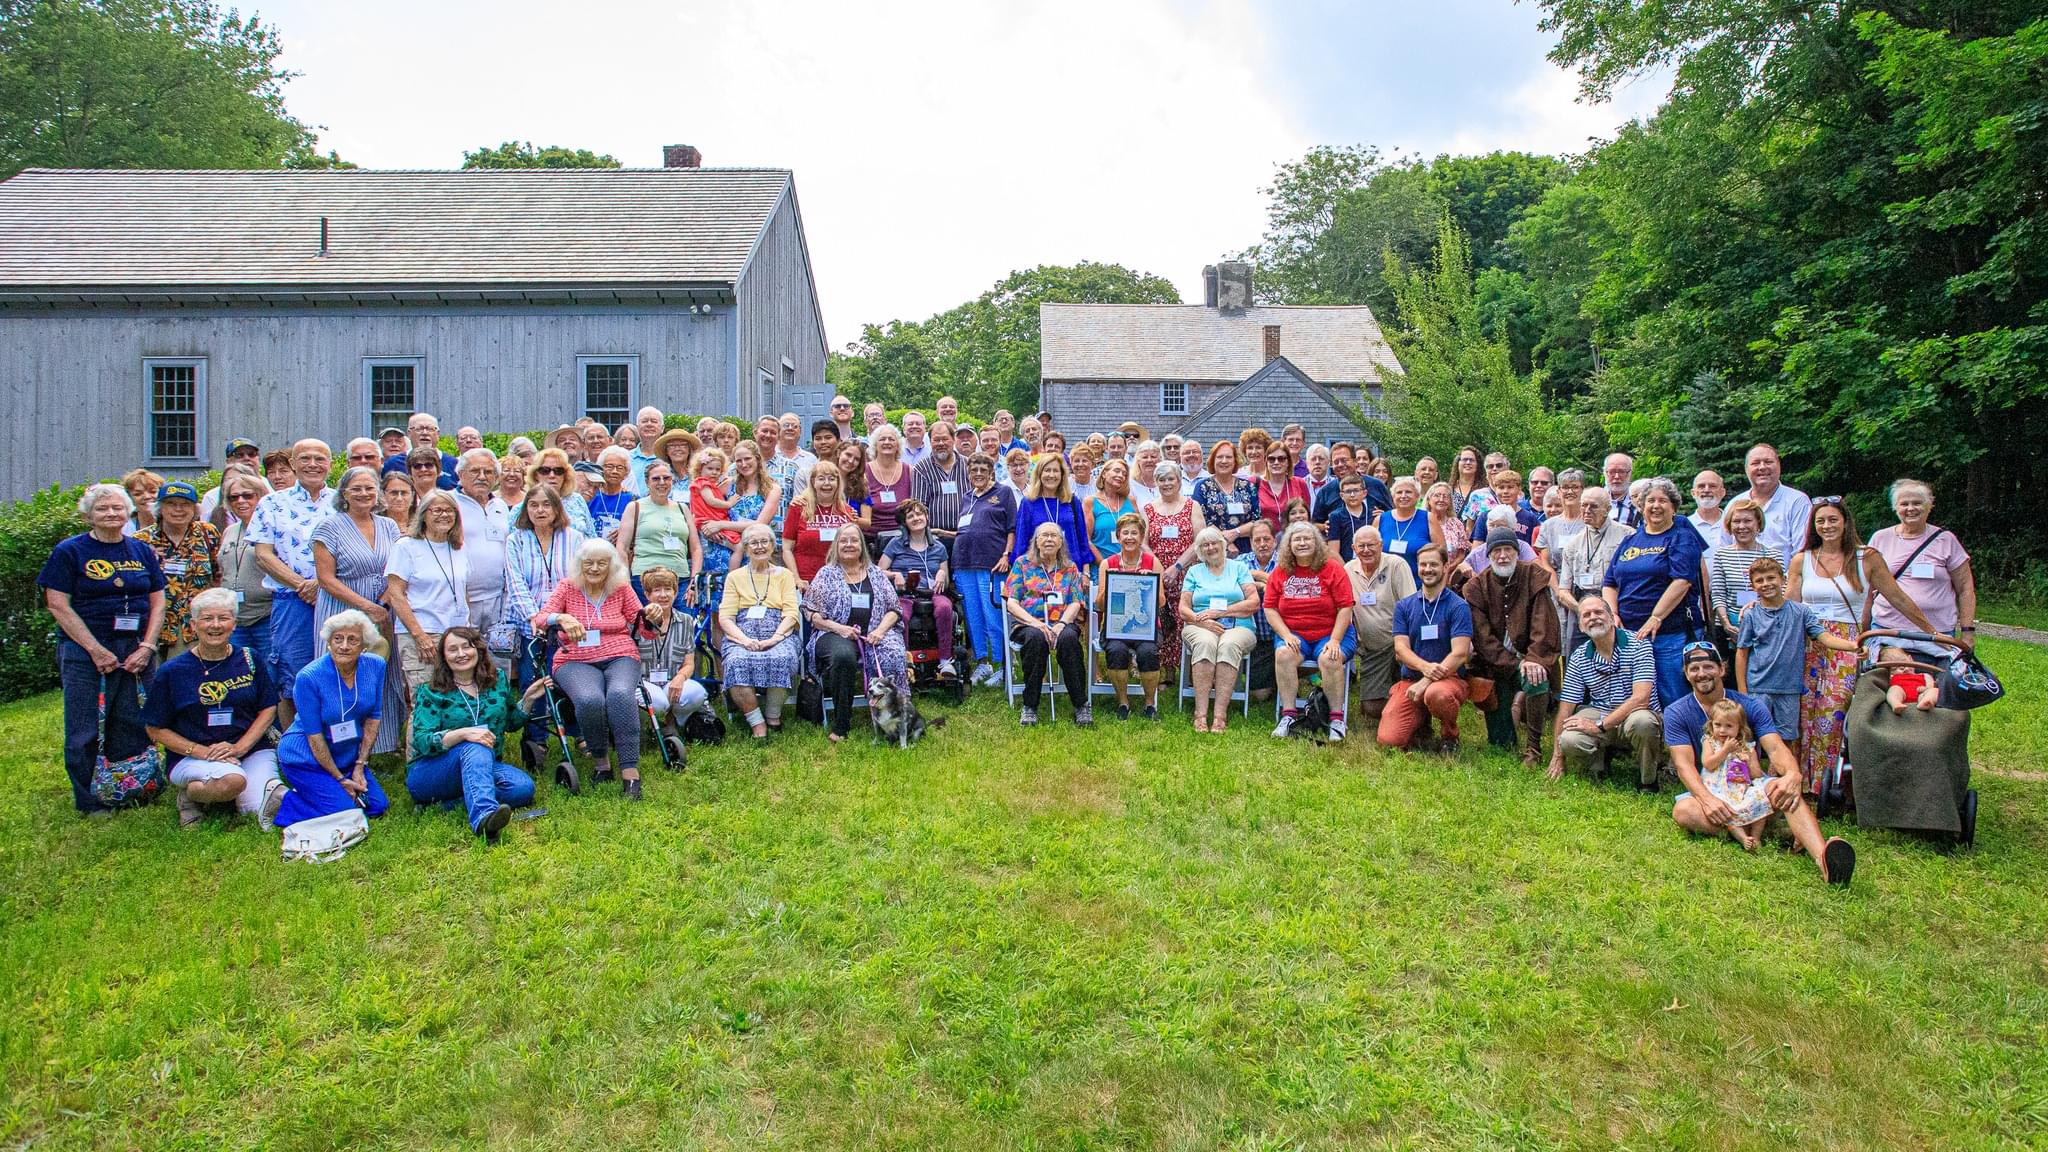 This is a group photograph of the entire Alden/Brown/Delano Annual Reunion Attendees taken on 08/05/2023